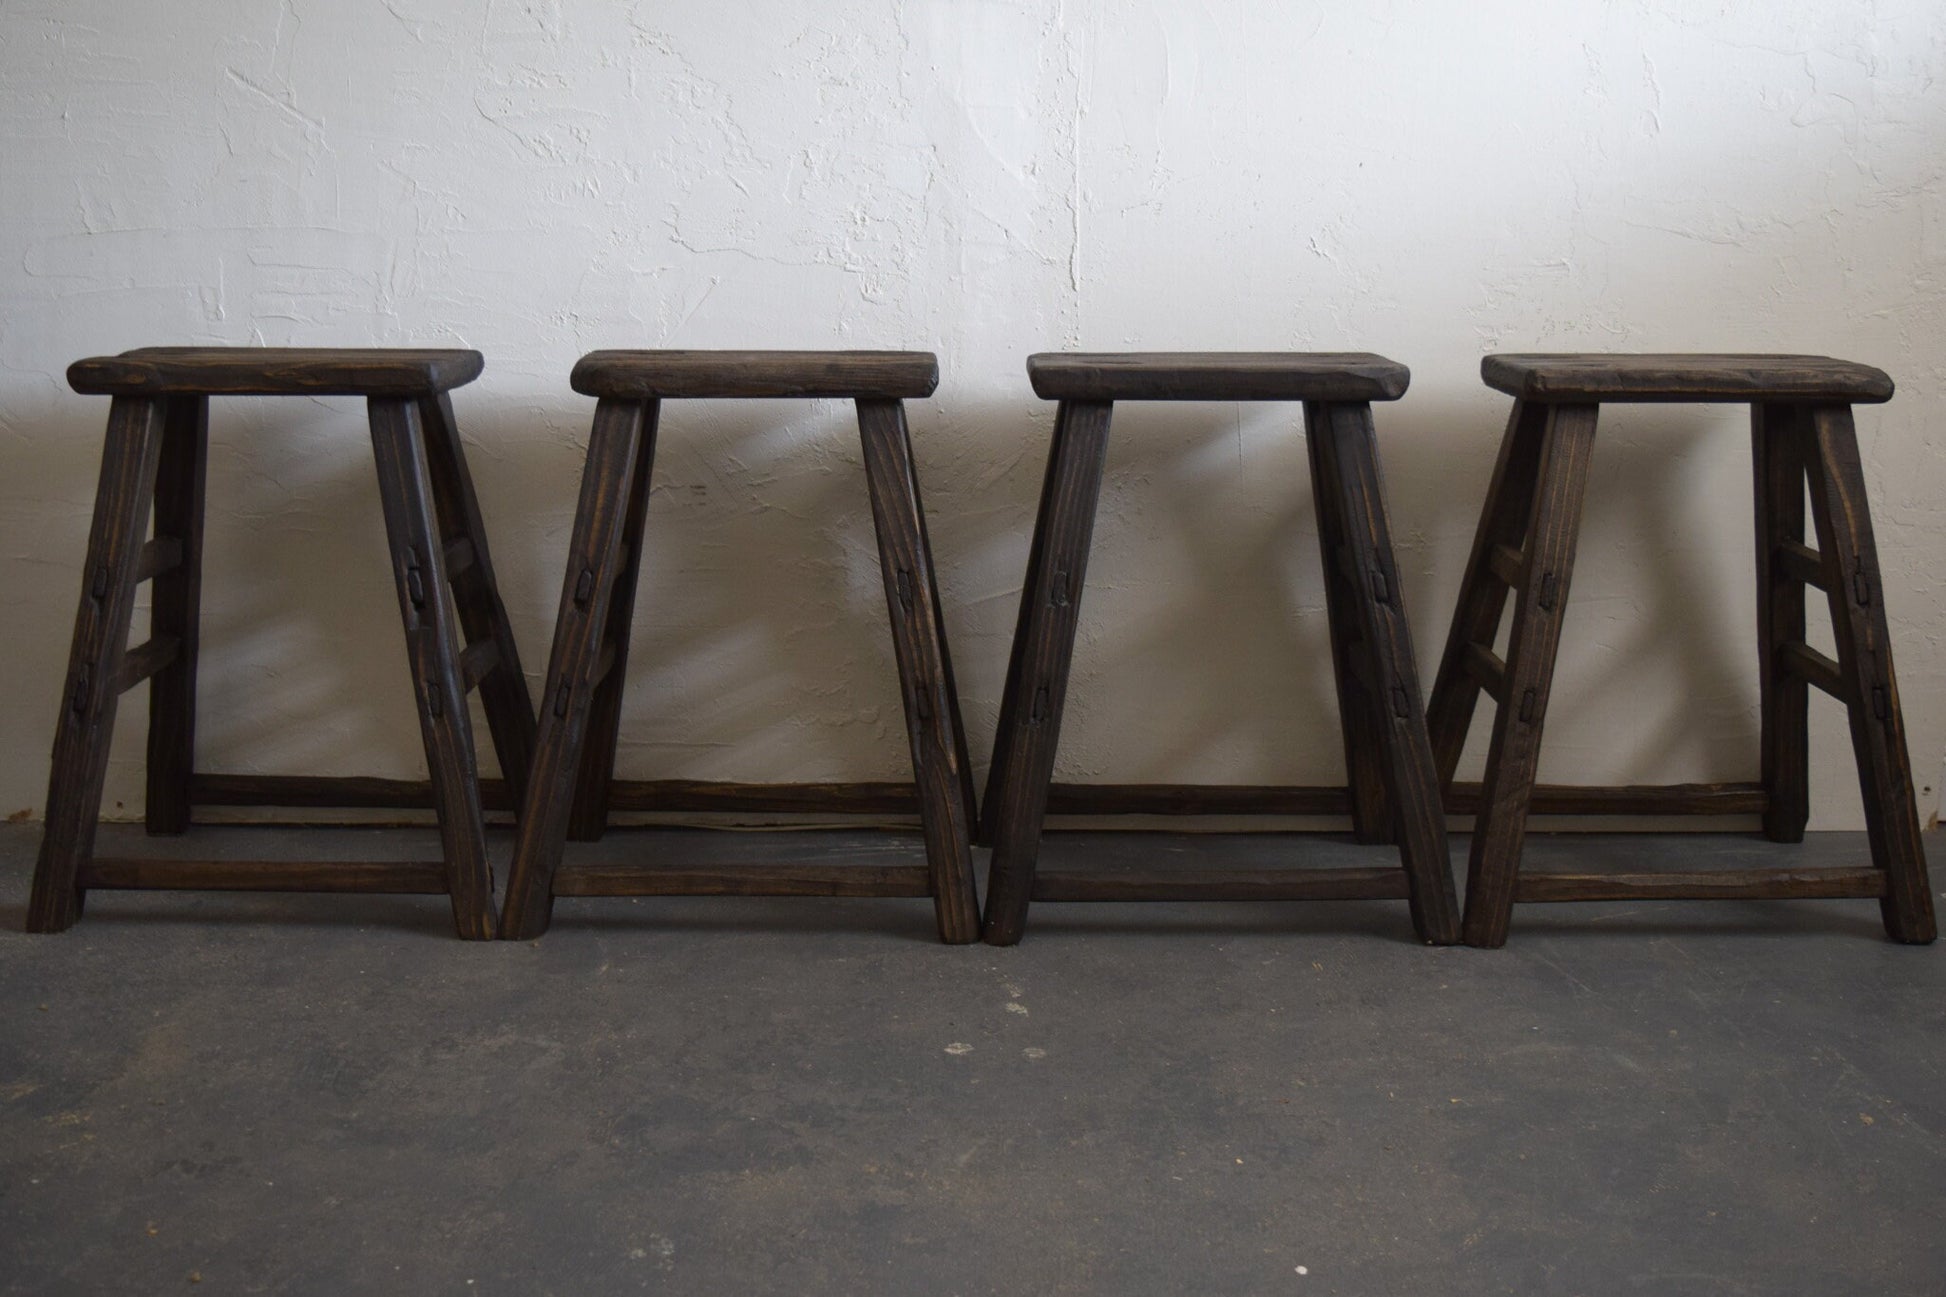 Counter Height Dark Wooden Stools (sold individually)